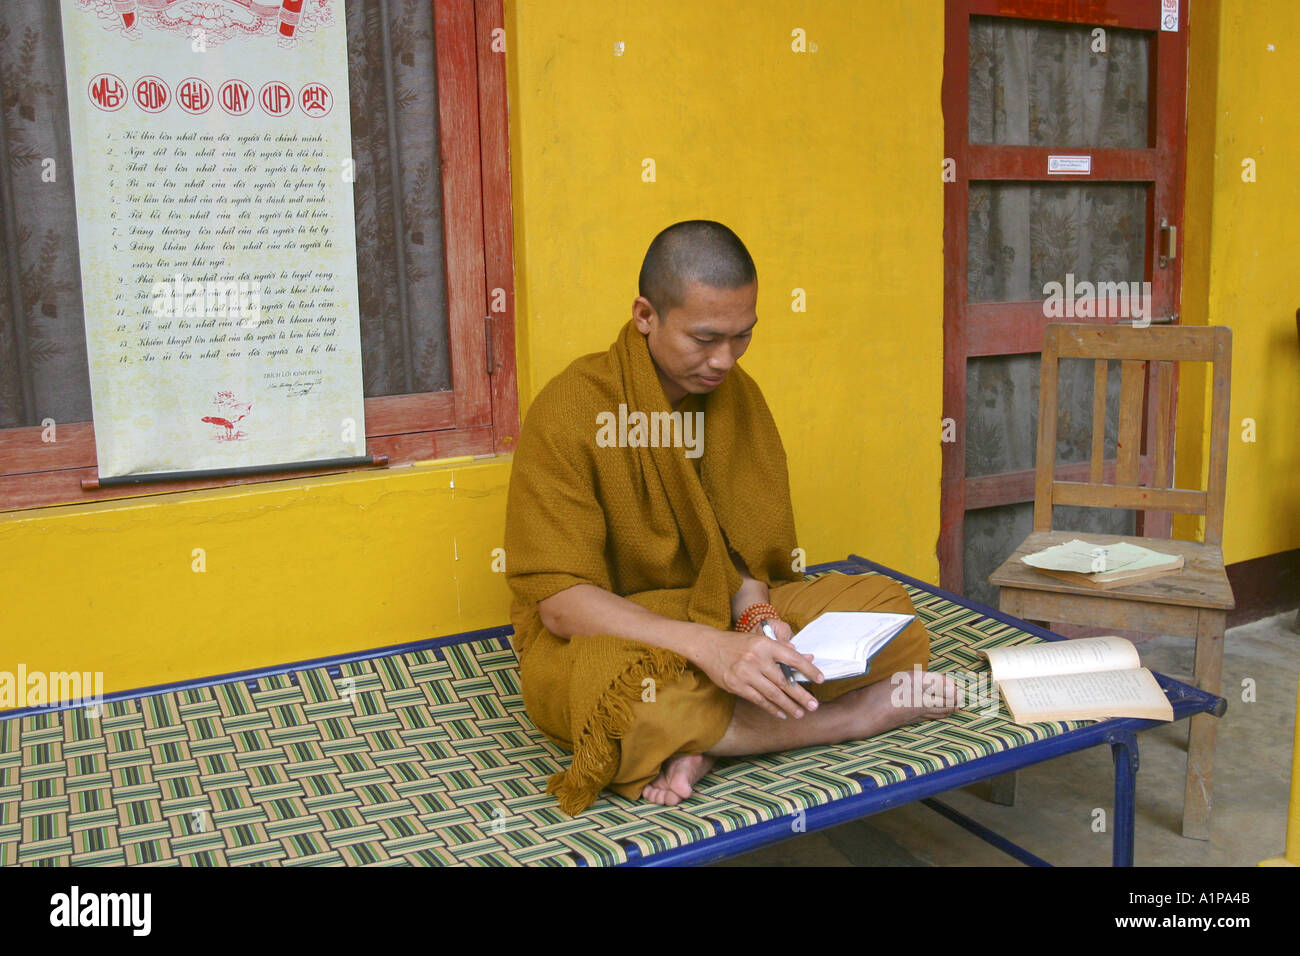 A Thai Buddhist monk reads in a book outside his monastery in Sarnath in Uttar Pradesh in India Stock Photo